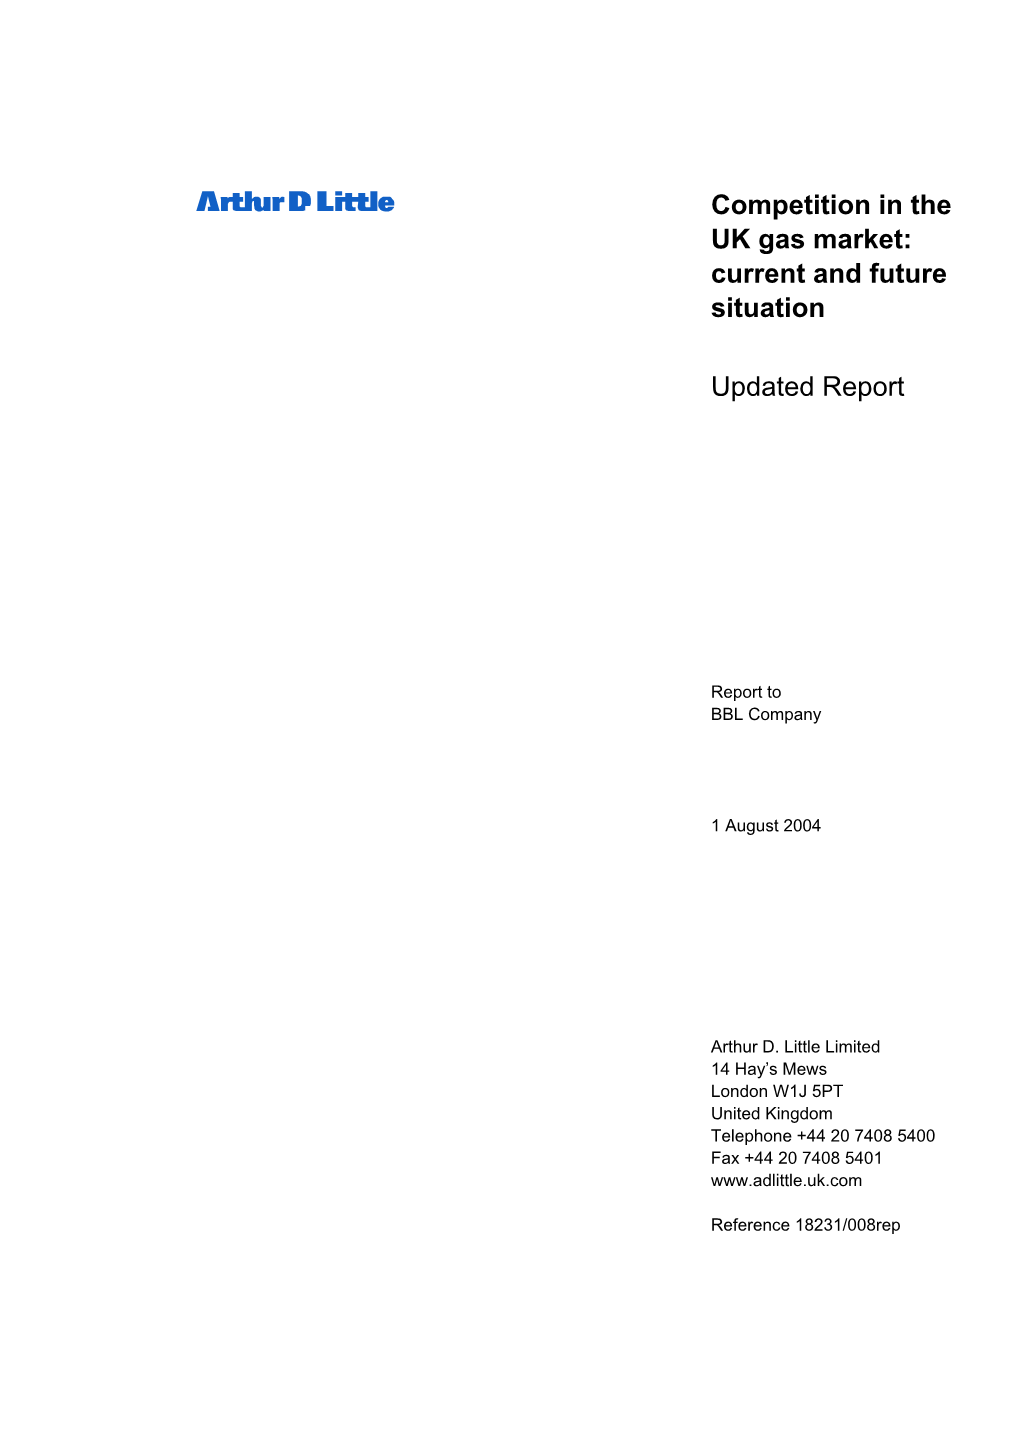 Arthur D. Little Report on Competition in the UK Gas Market